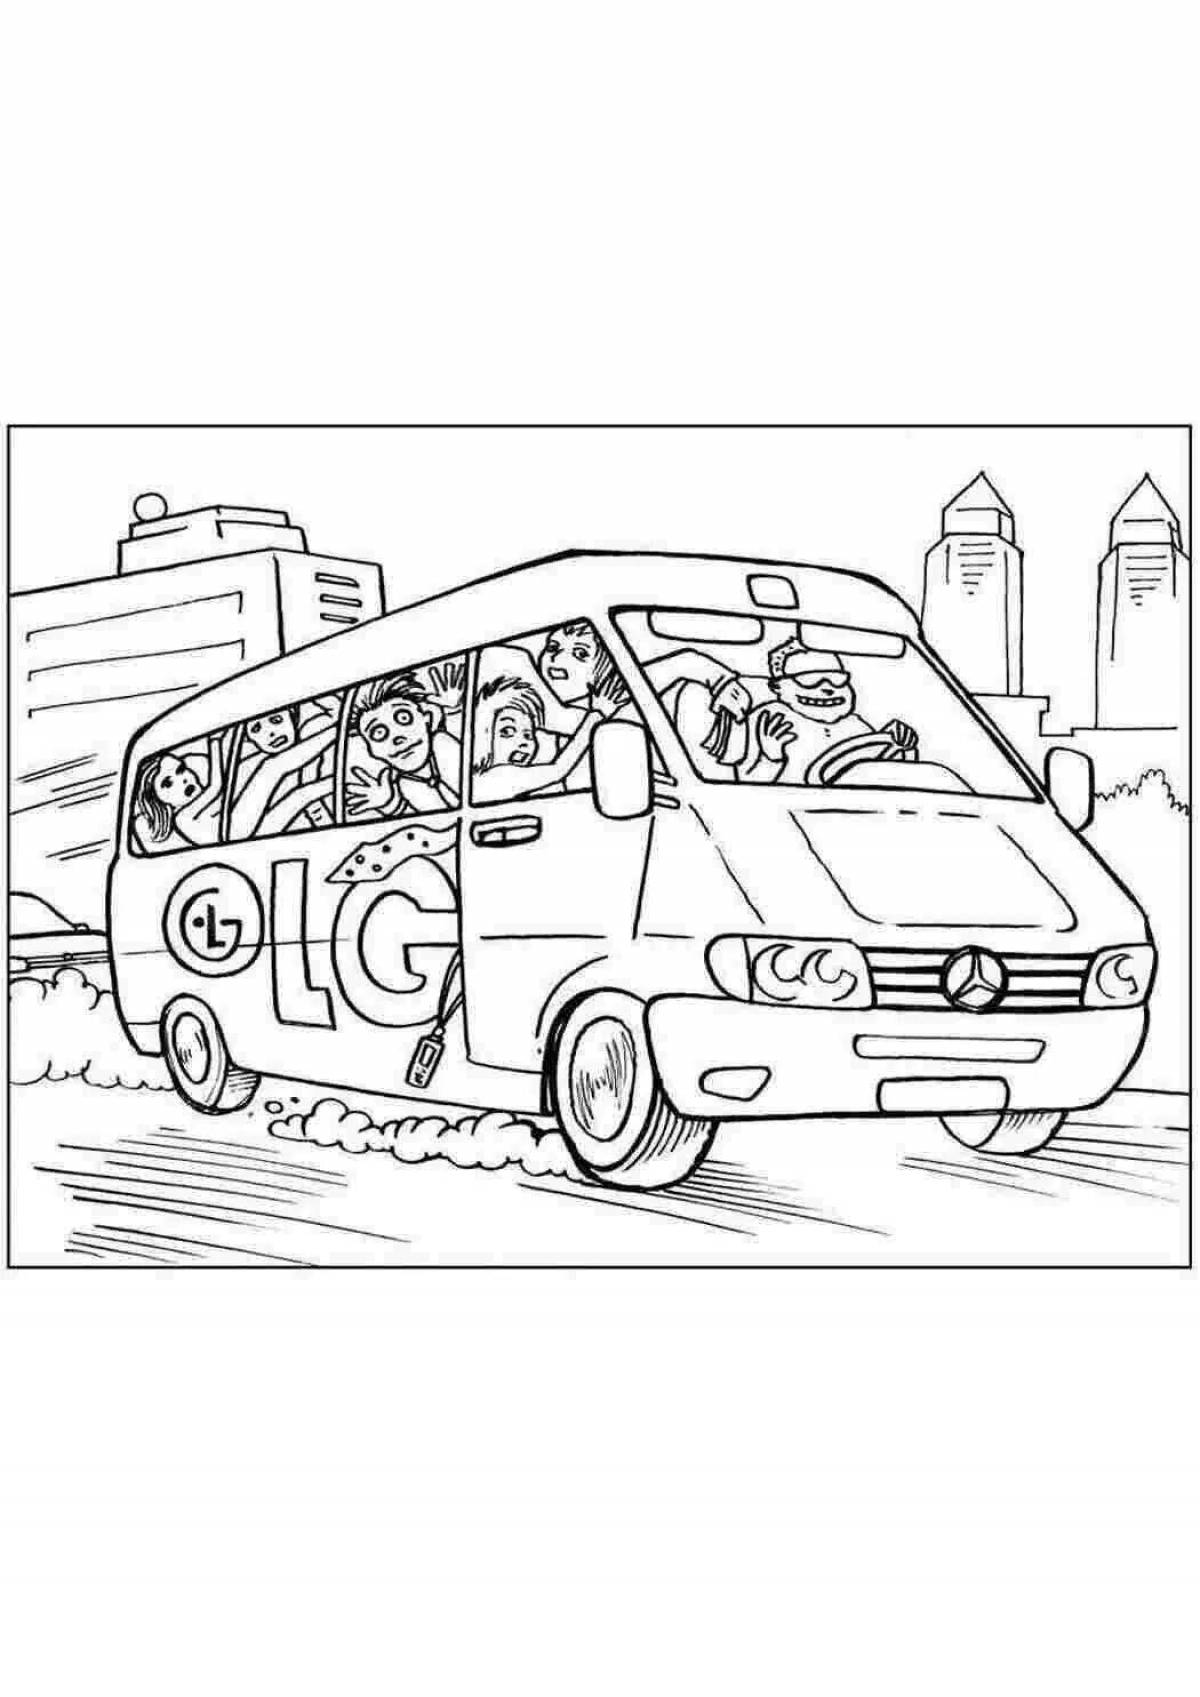 Grand Taxi car coloring page